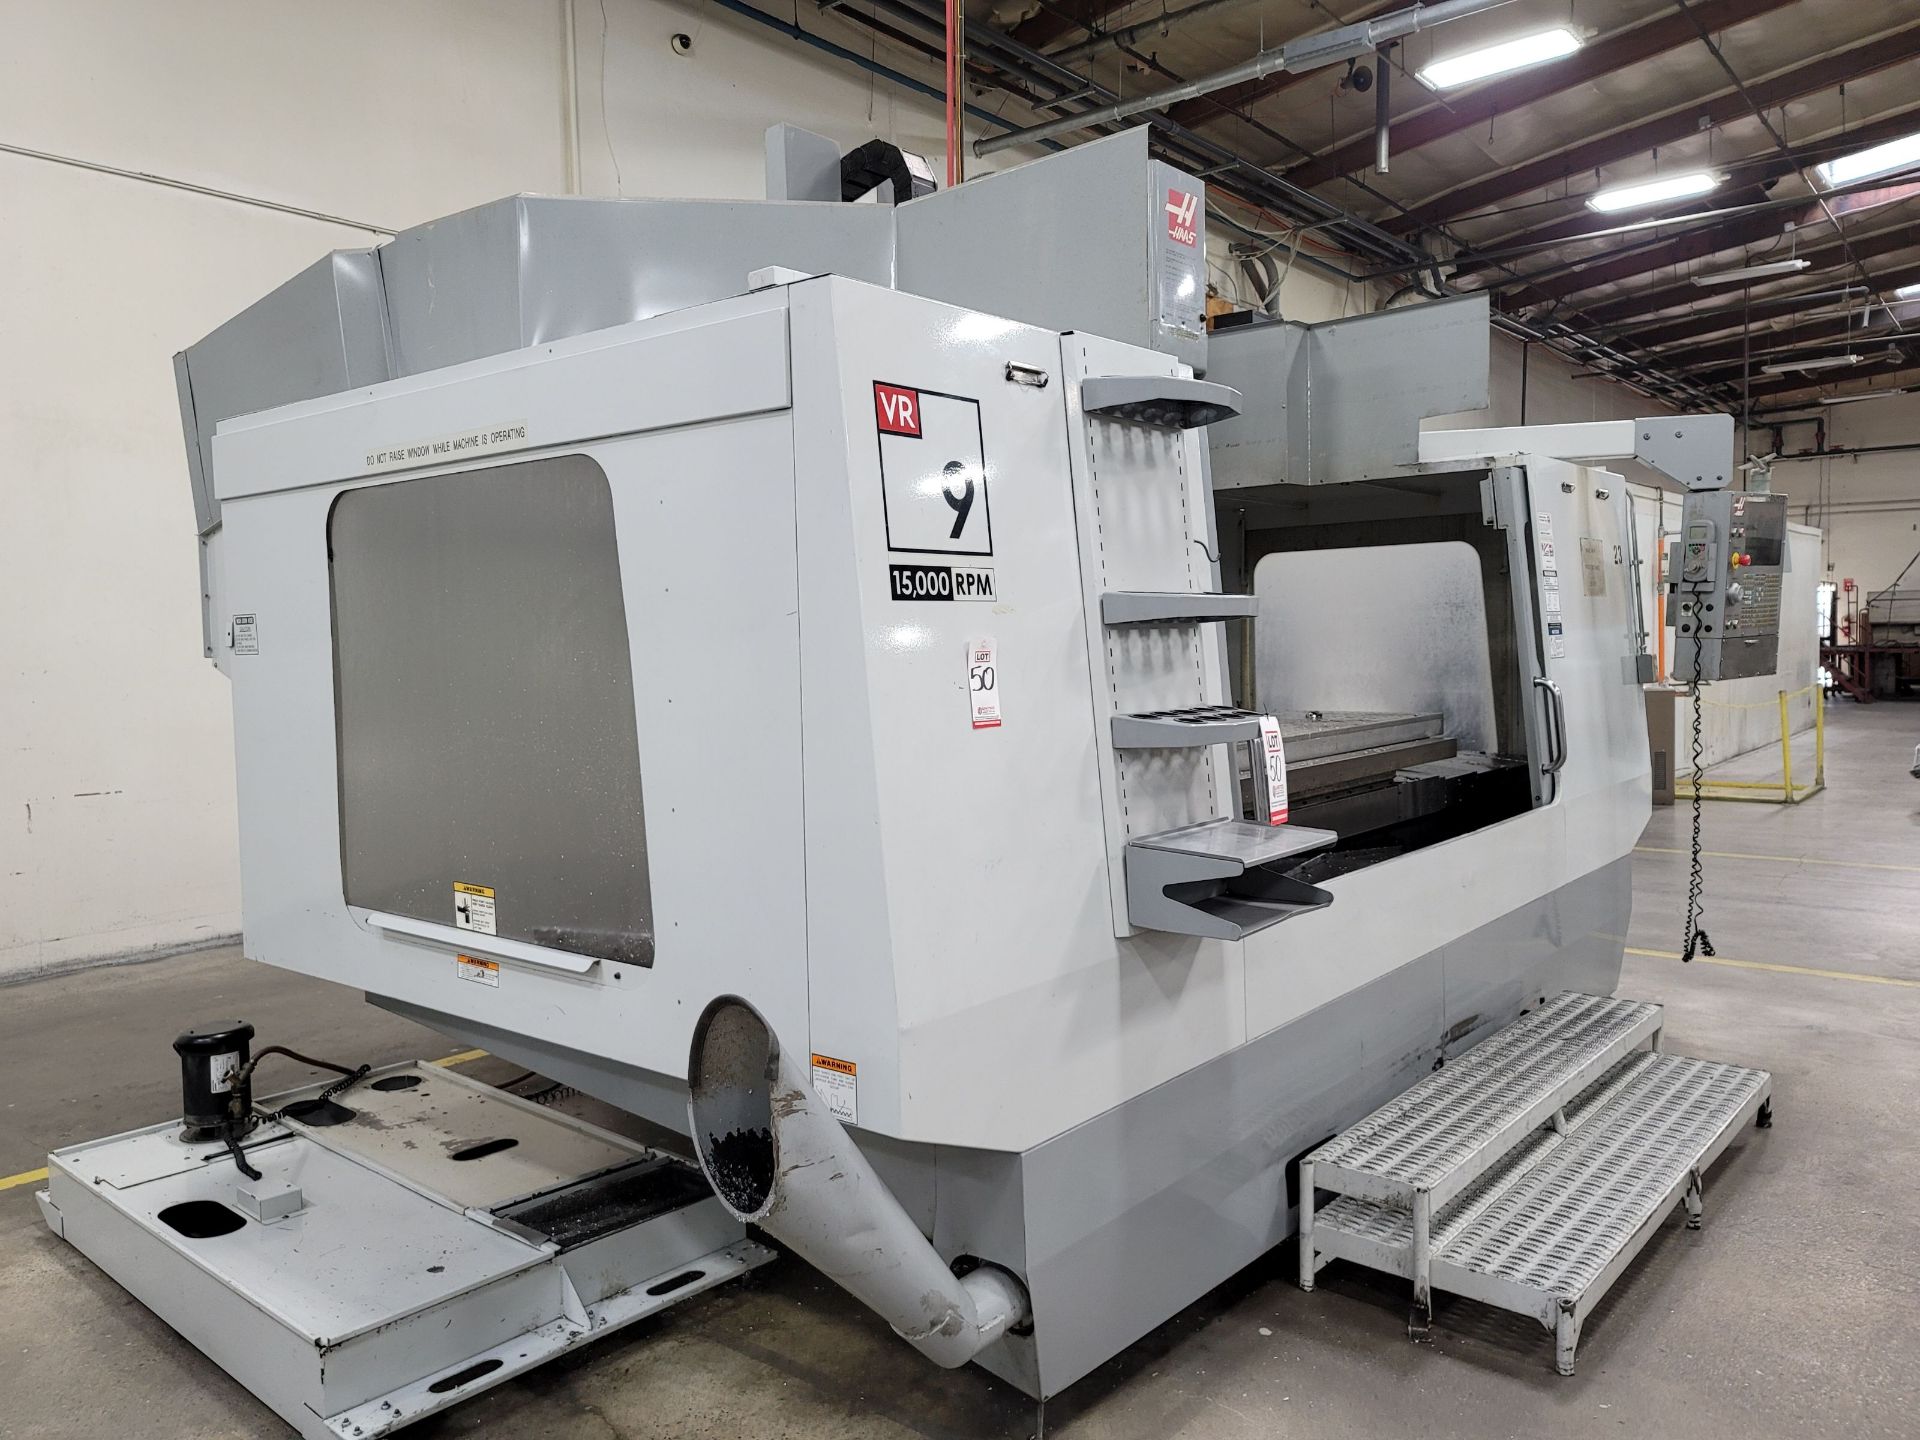 2006 HAAS VR-9 VERTICAL MACHINING CENTER, 5-AXIS ARTICULATING HEAD, XYZ TRAVELS: 84" X, 40" Y, 30" - Image 12 of 17